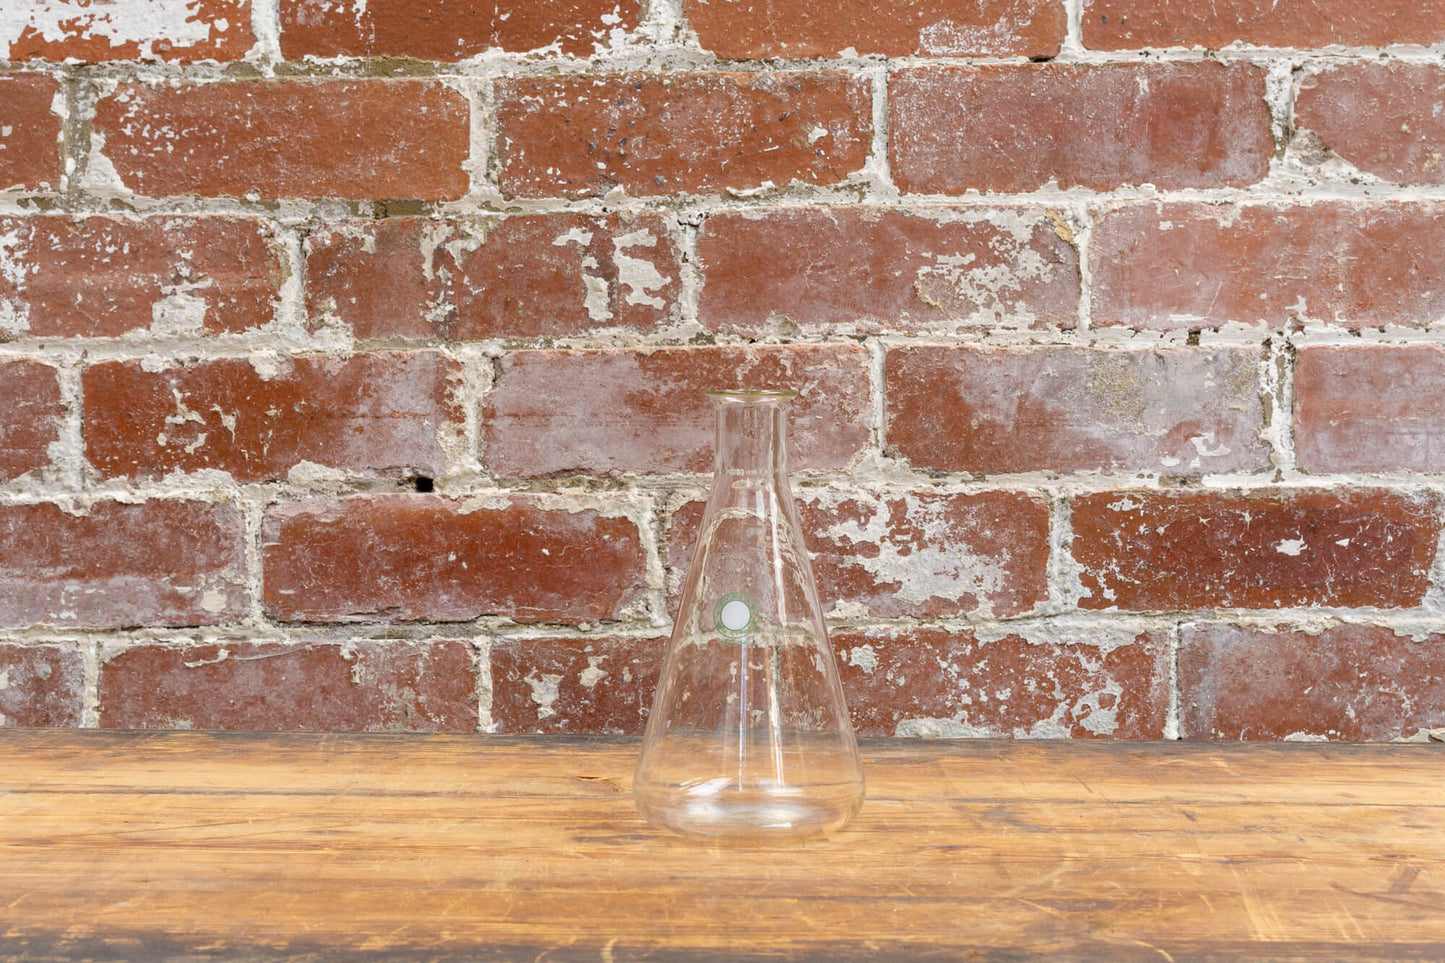 Photo shows a selection of vintage glass laboratory vessels on a table. The background is a red rustic brick wall.